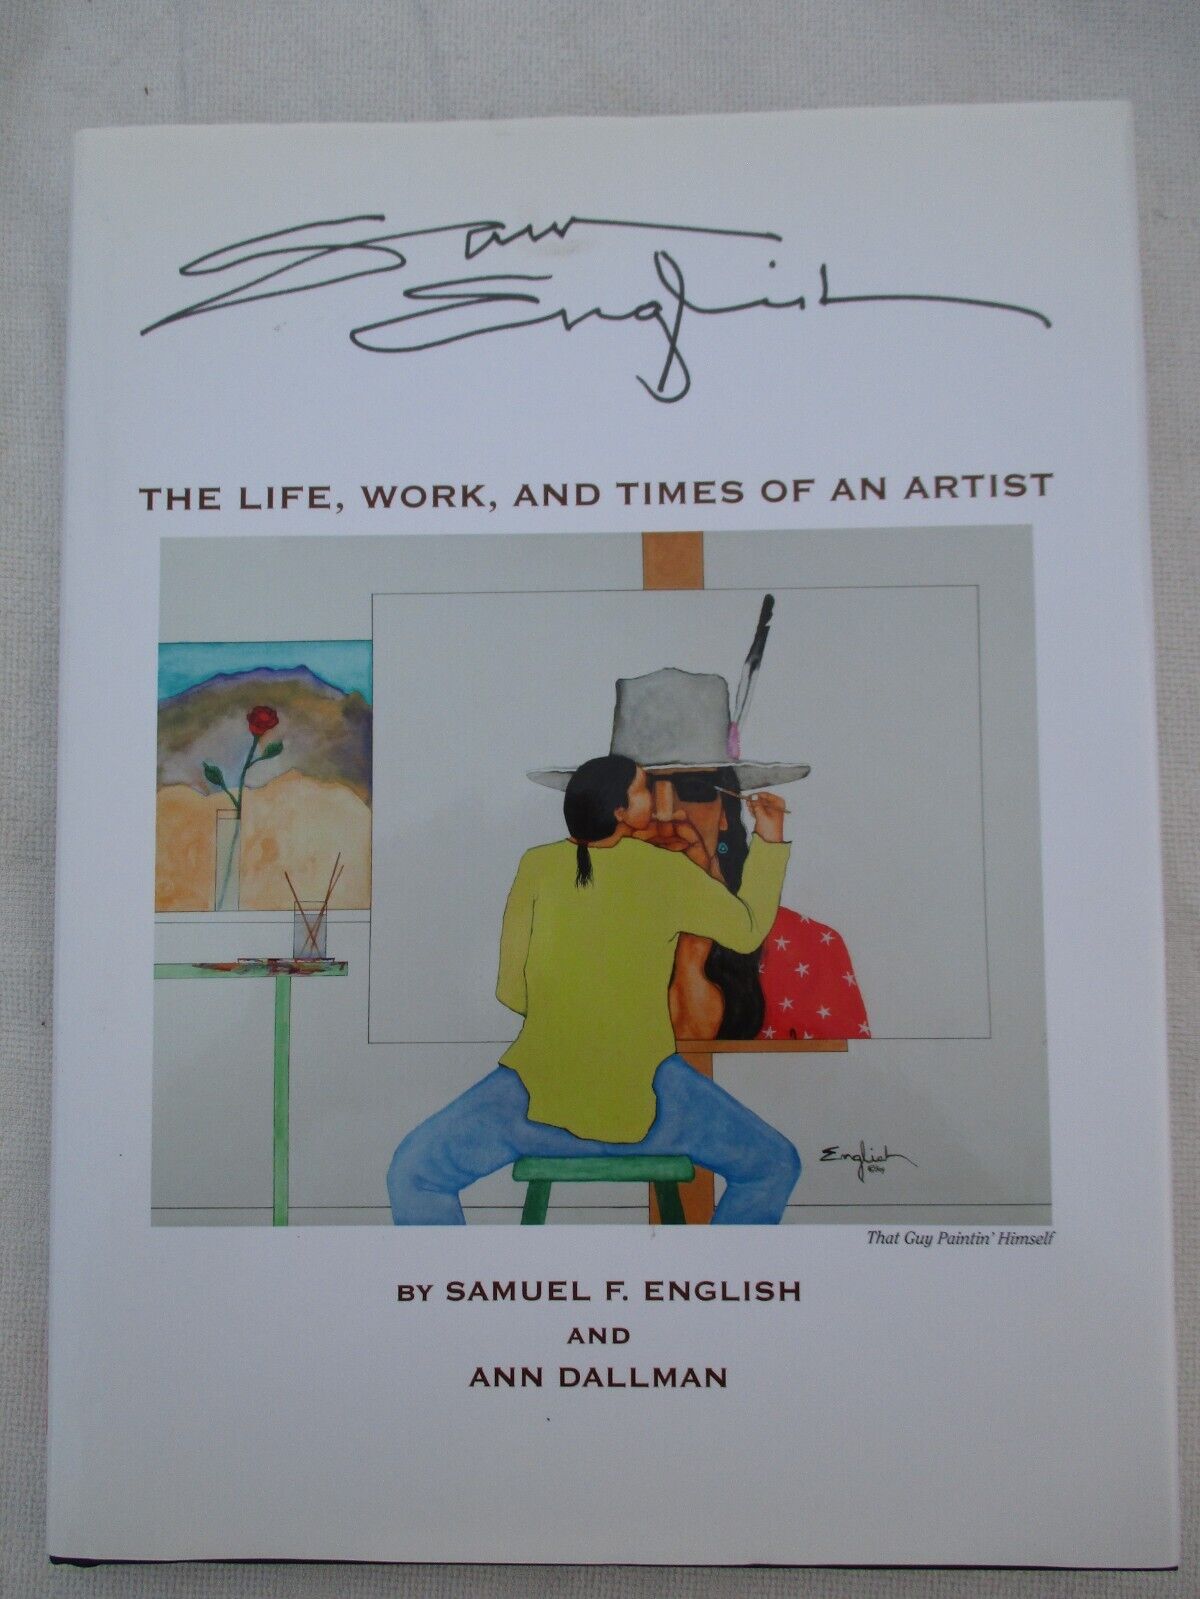 THE LIFE, WORK, AND TIMES OF AN ARTIST. BY SAMUEL F. ENGLISH & ANN DALLMAN.